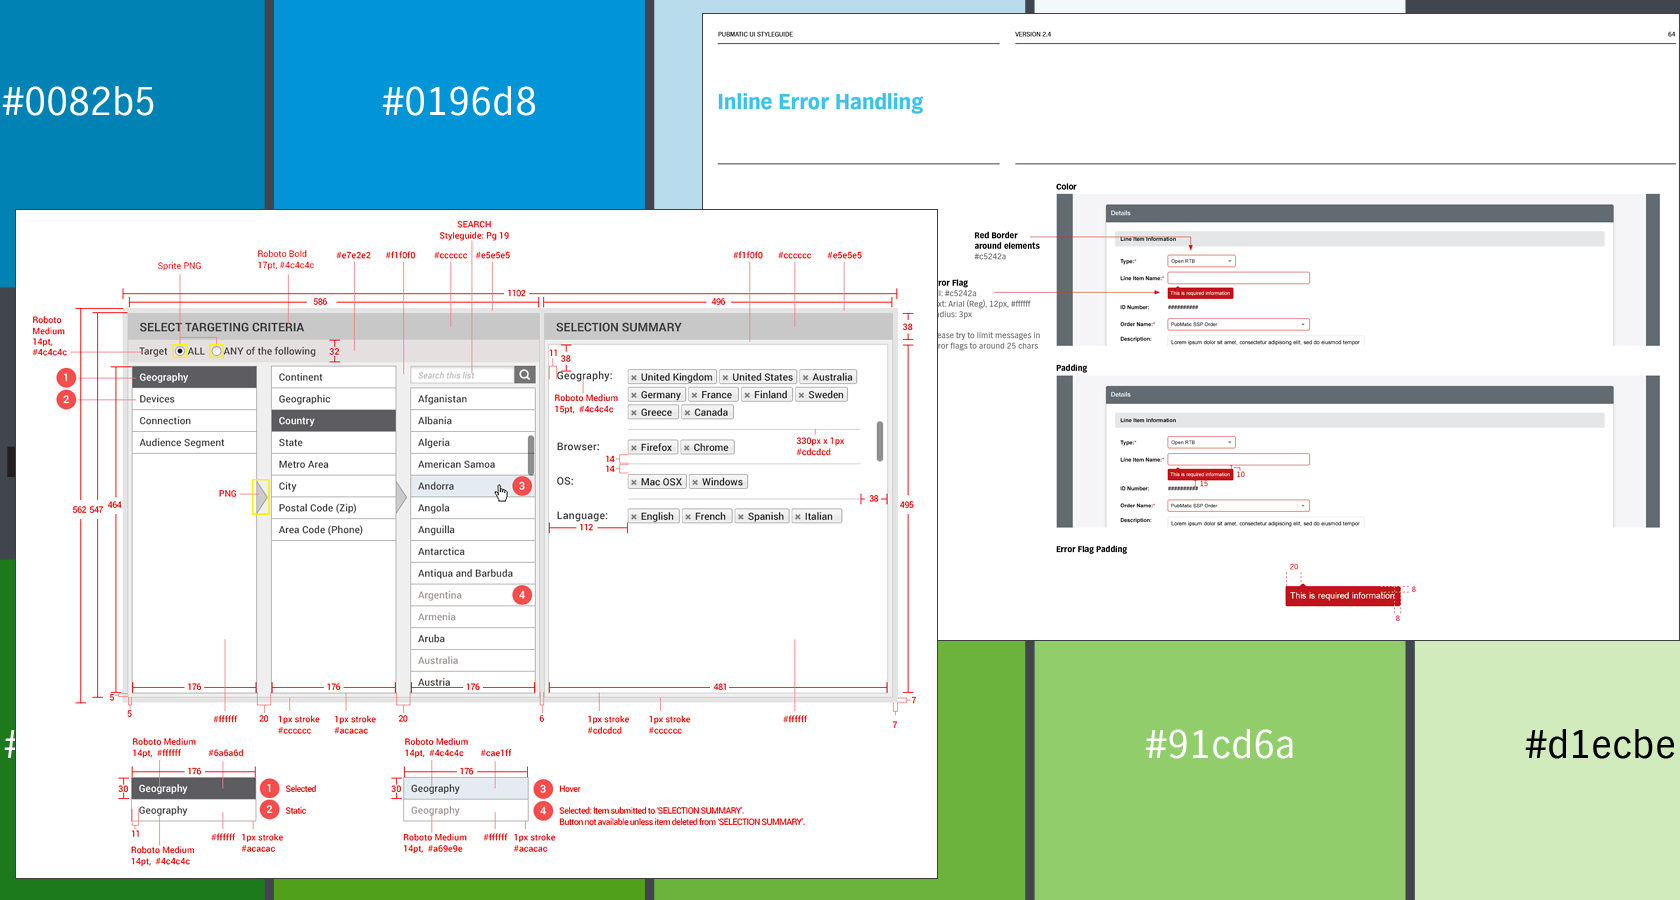 Styleguides and UX specifications are a UX deliverable and part of the UX design process